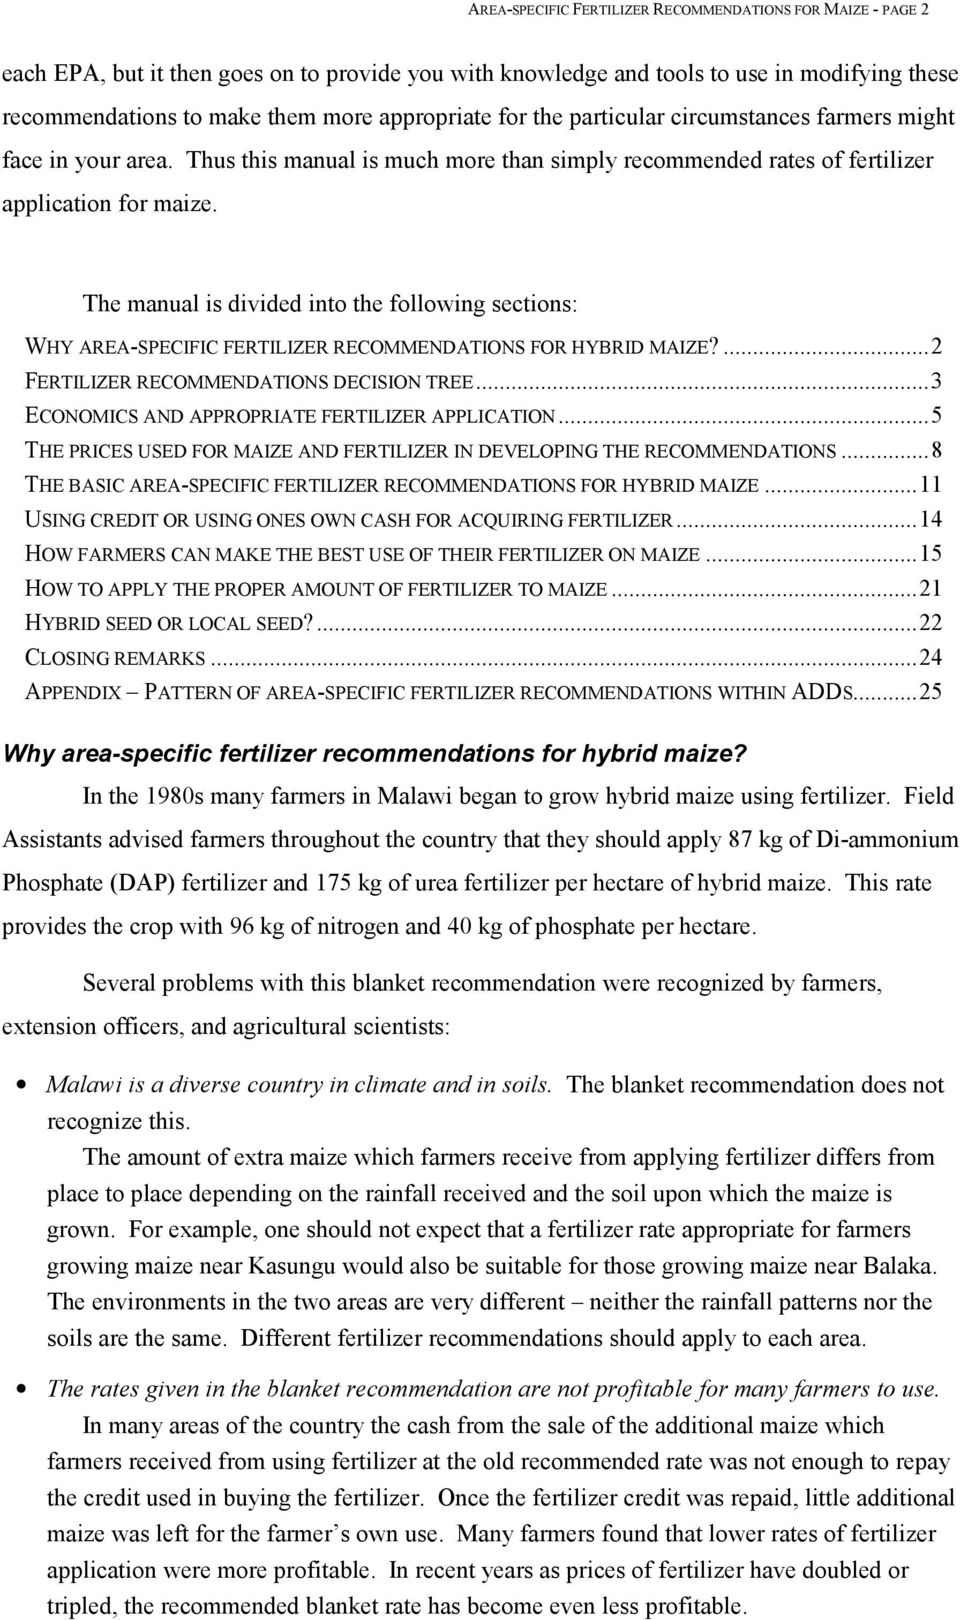 The manual is divided into the following sections: WHY AREA-SPECIFIC FERTILIZER RECOMMENDATIONS FOR HYBRID MAIZE?...2 FERTILIZER RECOMMENDATIONS DECISION TREE.